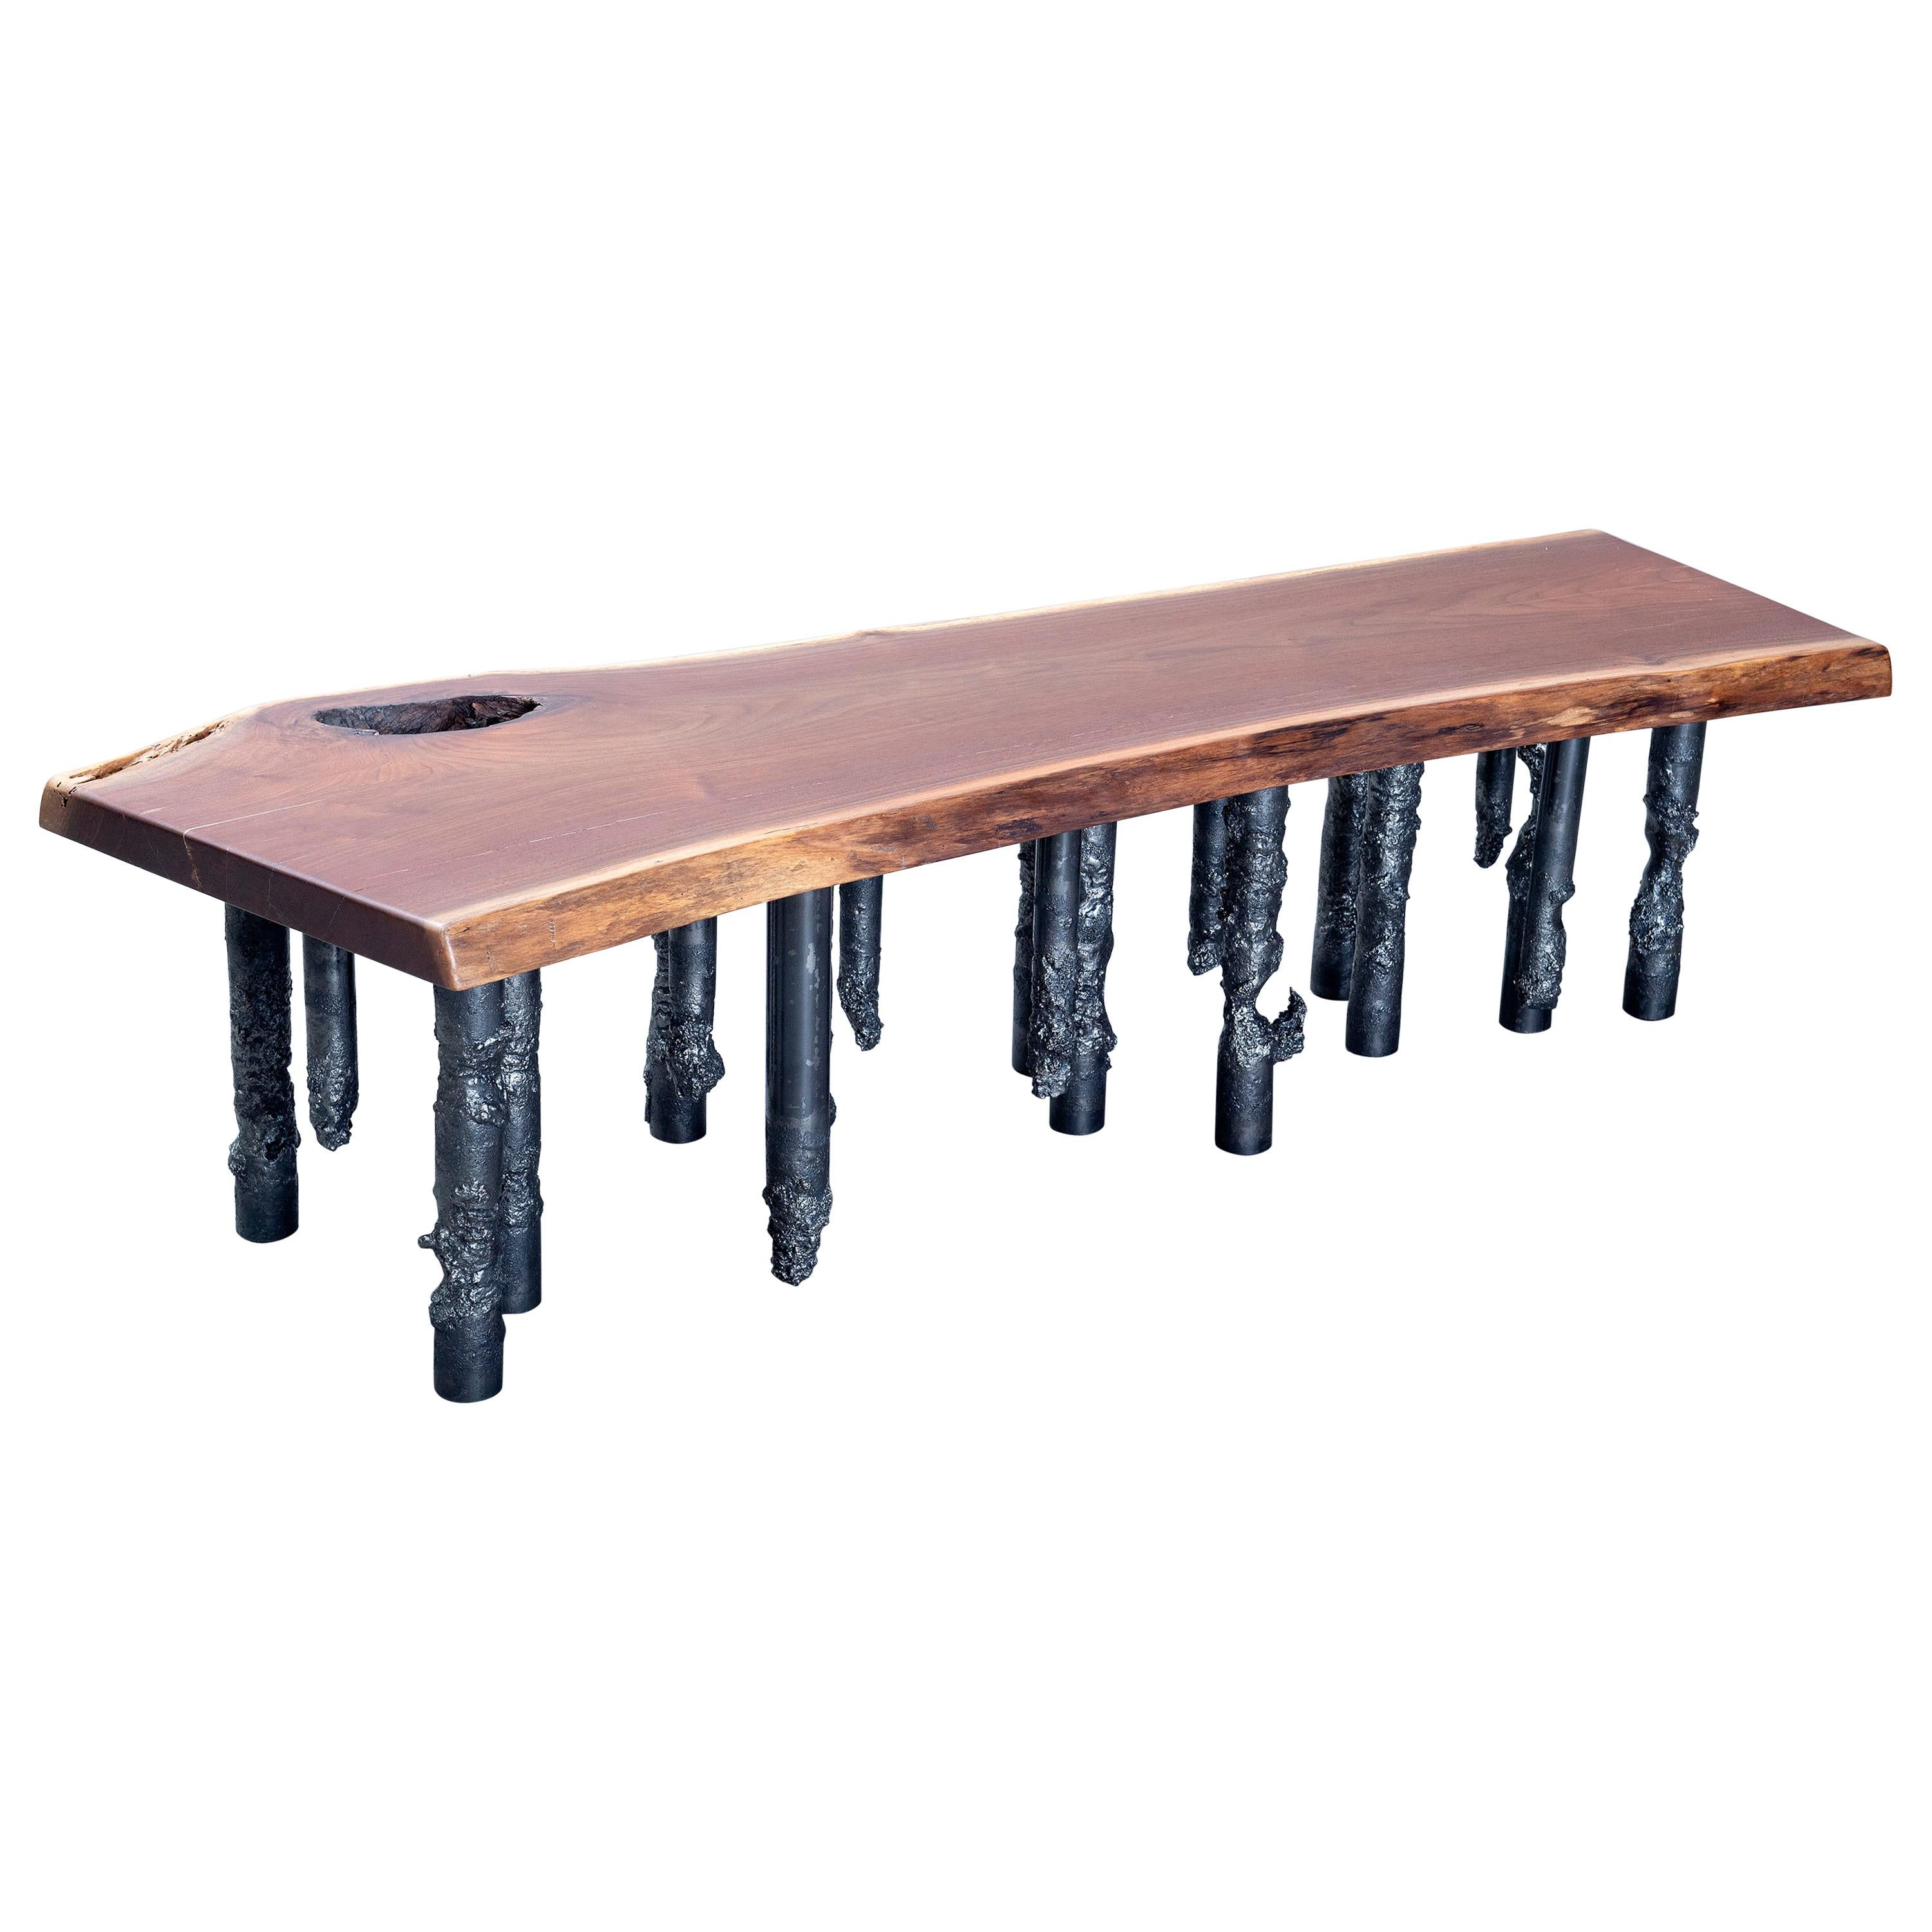 Handcrafted Artisan Walnut And Steel One Of A Kind Sculptural Industrial Bench For Sale